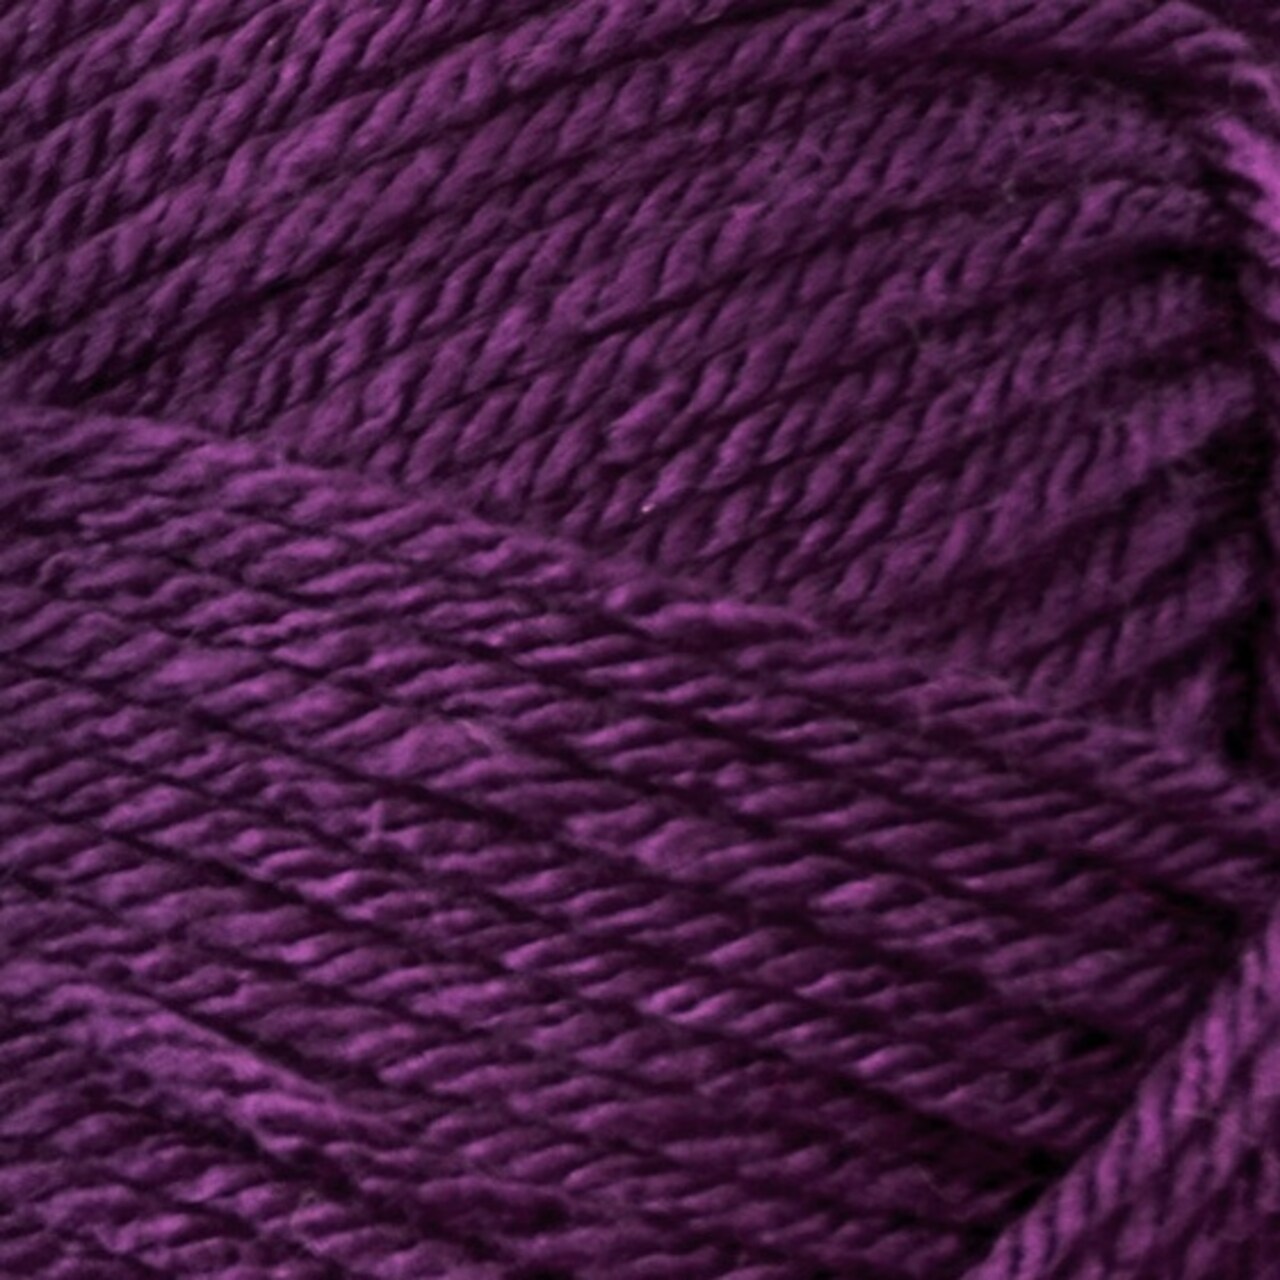 Premier Anti-Pilling Everyday Worsted Yarn | Michaels